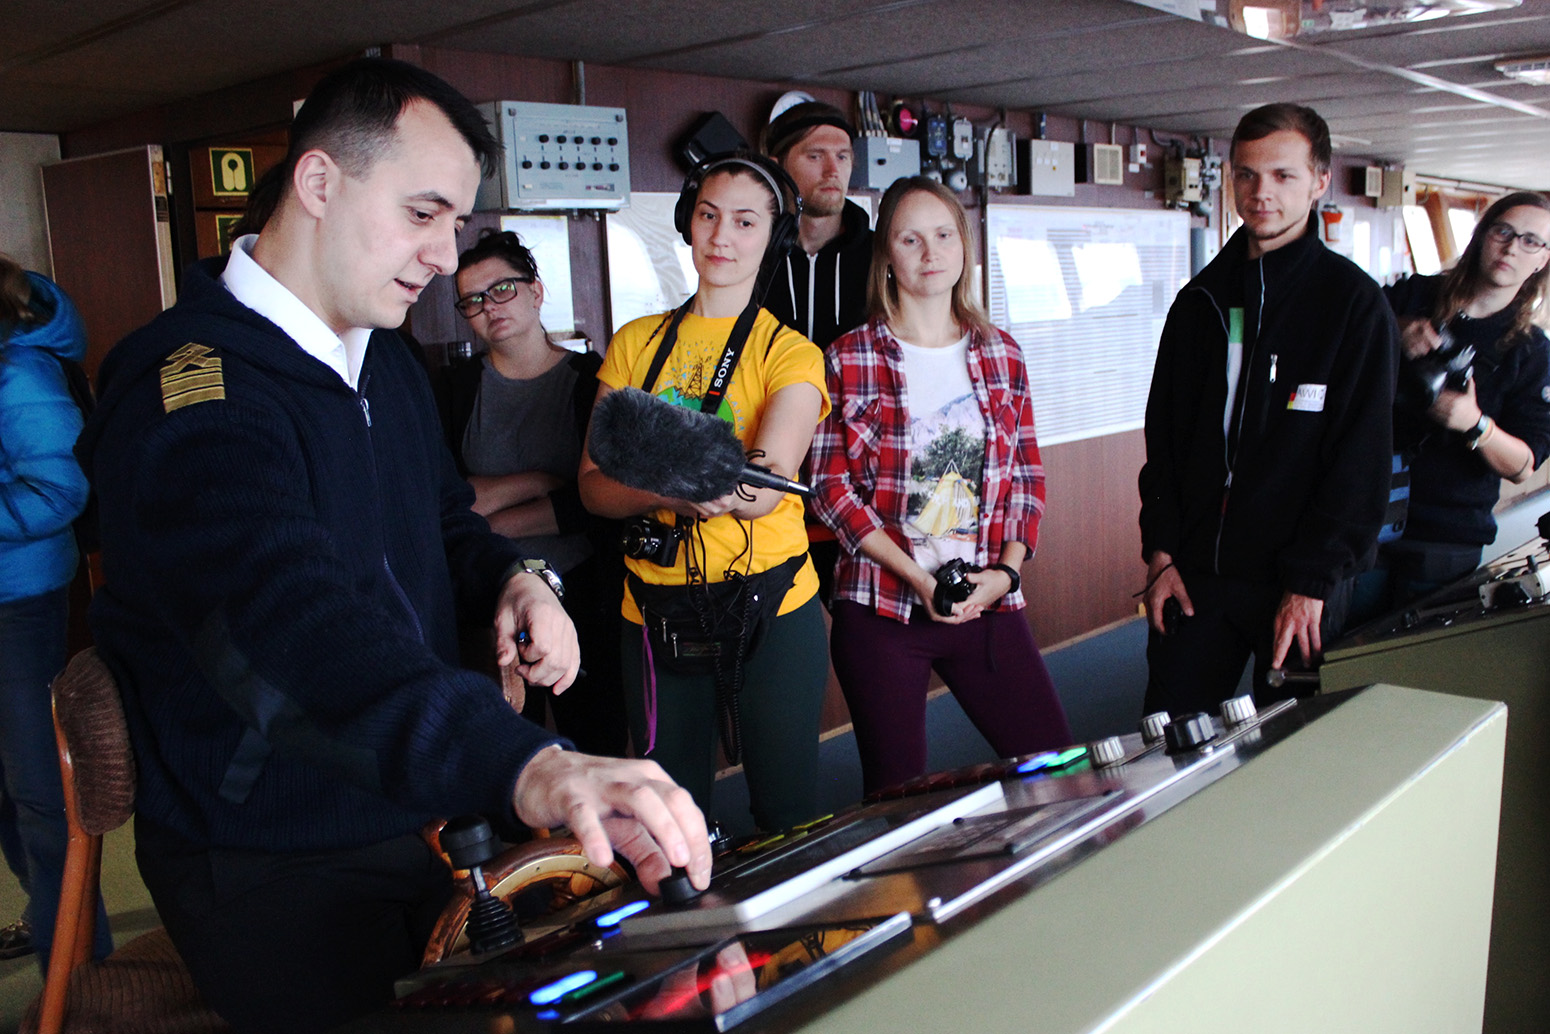 Grigory Romanav, chief officer onboard the Akademik Fedorov, demonstrates equipment on the bridge of the ship.